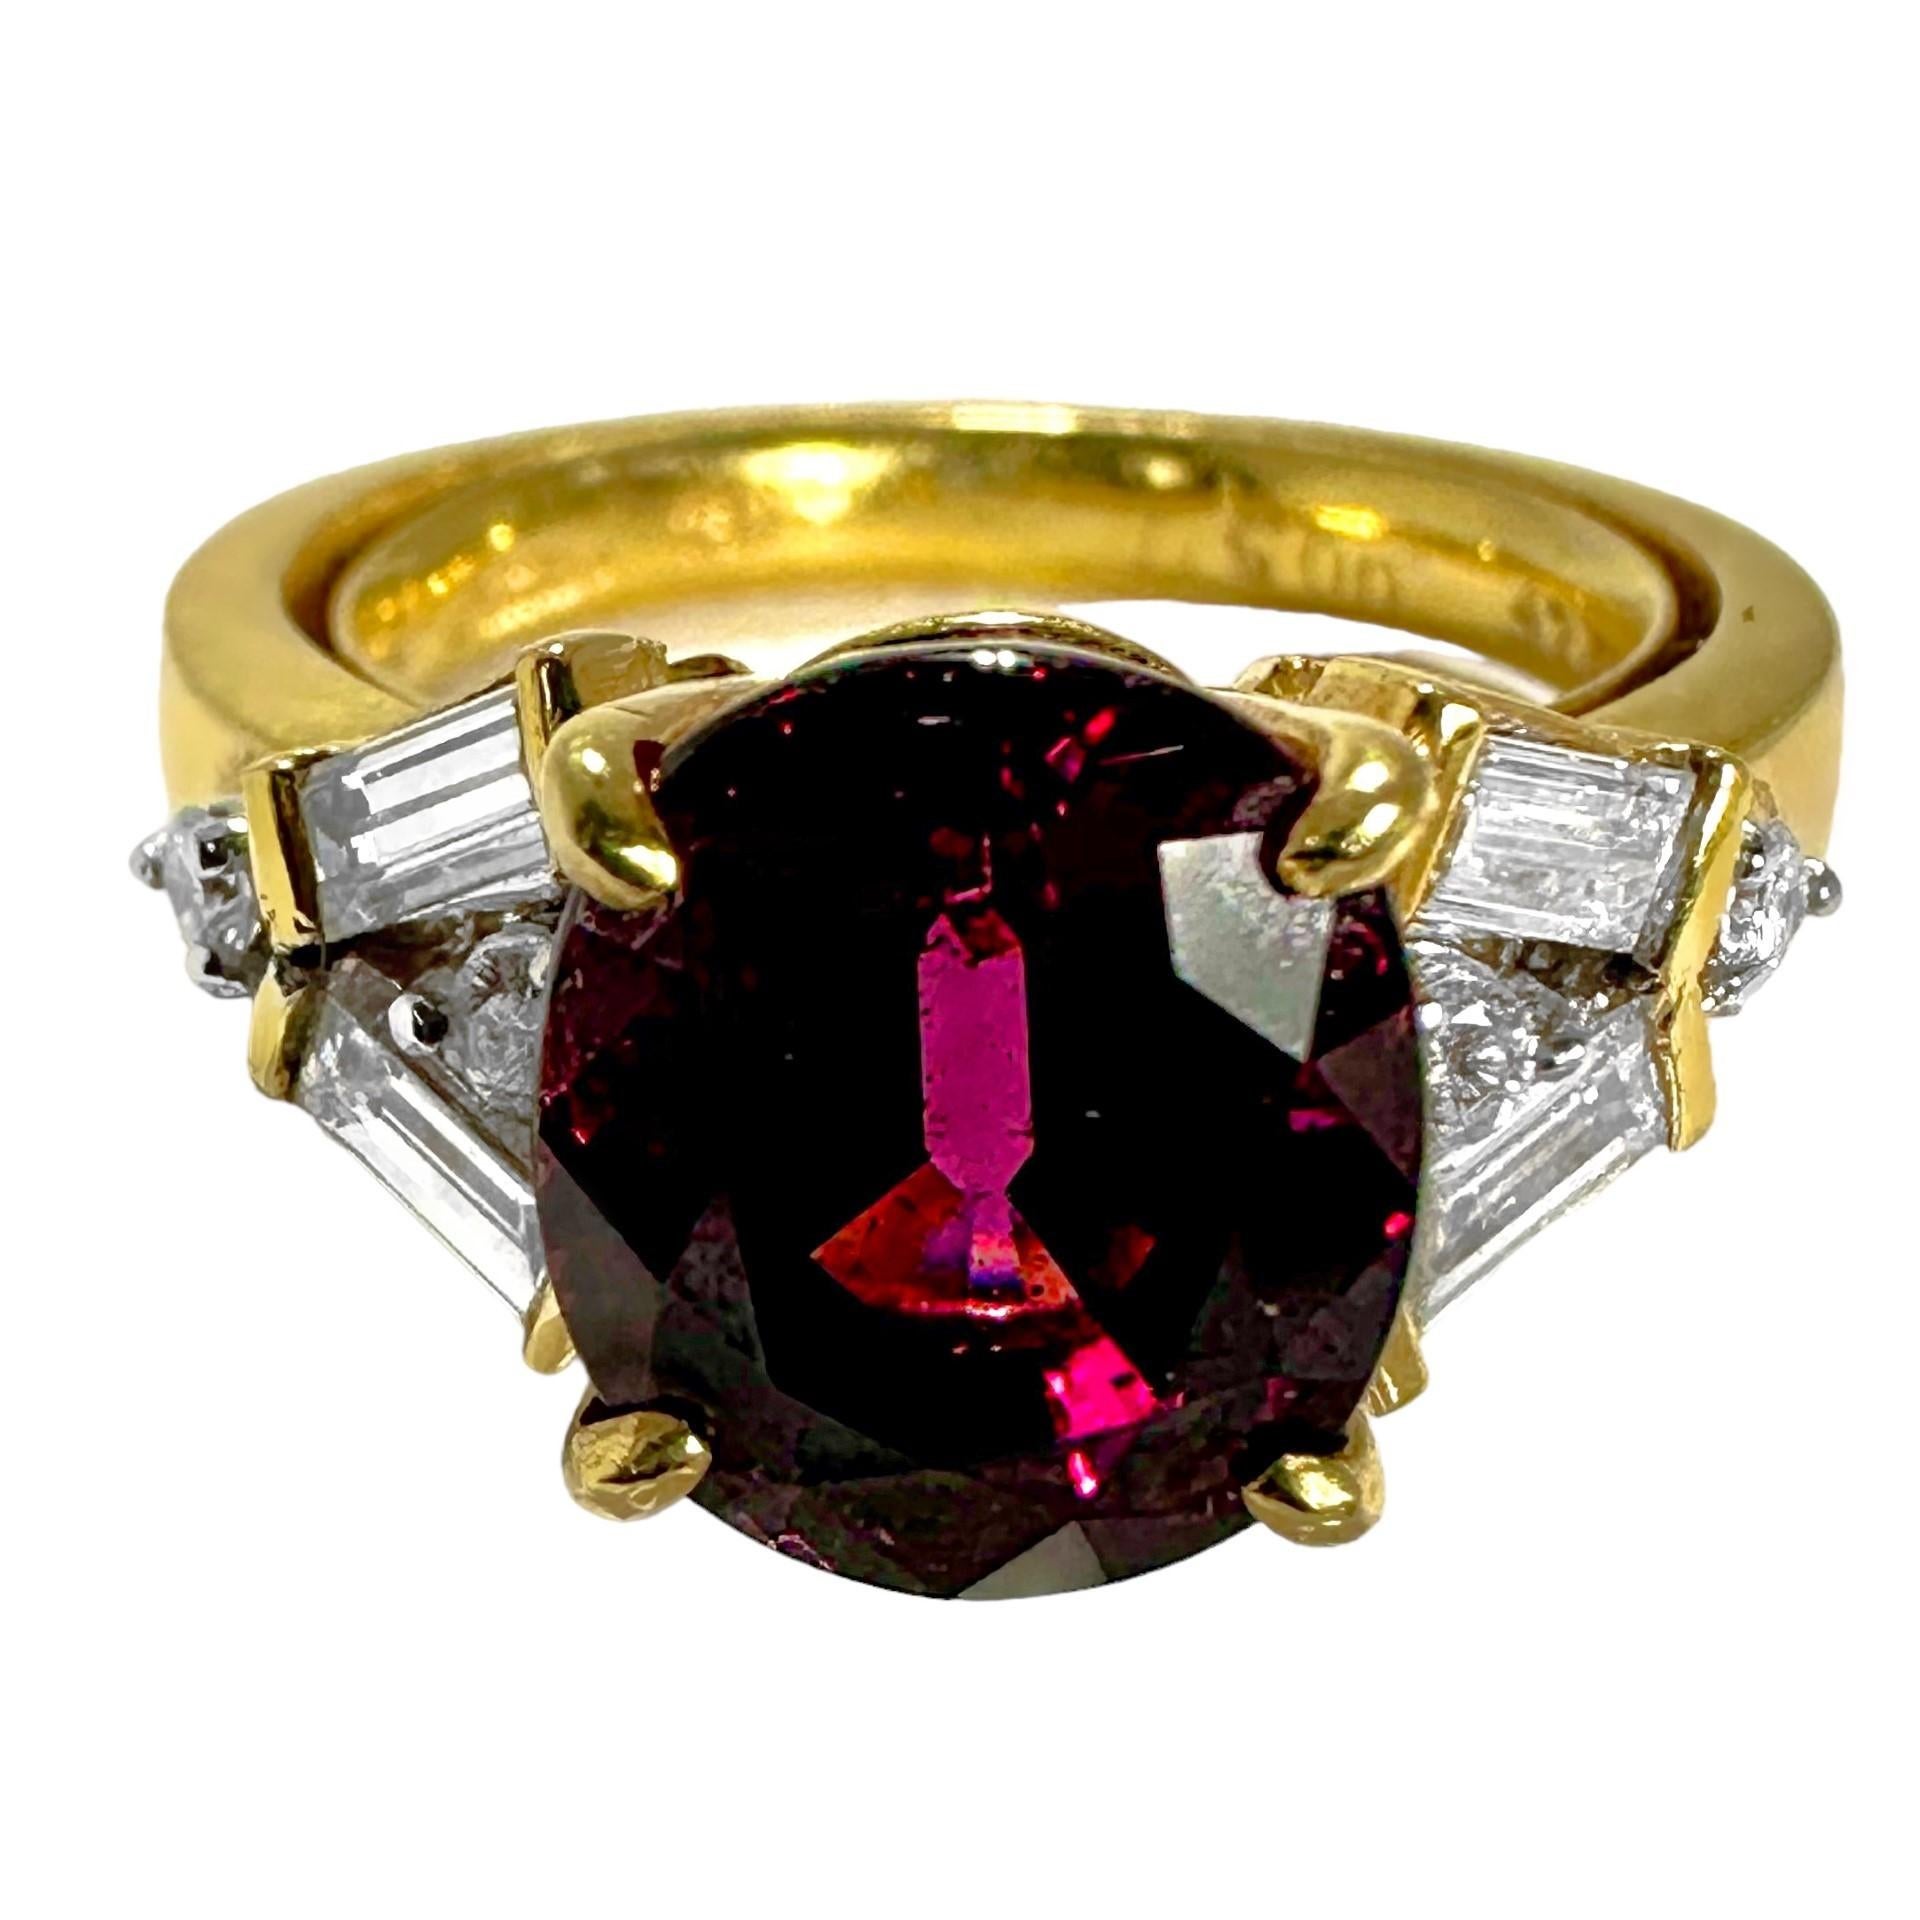 Modern 18k Yellow Gold Ring with 4.76ct Red Wine Colored, Oval Shaped Garnet & Diamonds For Sale